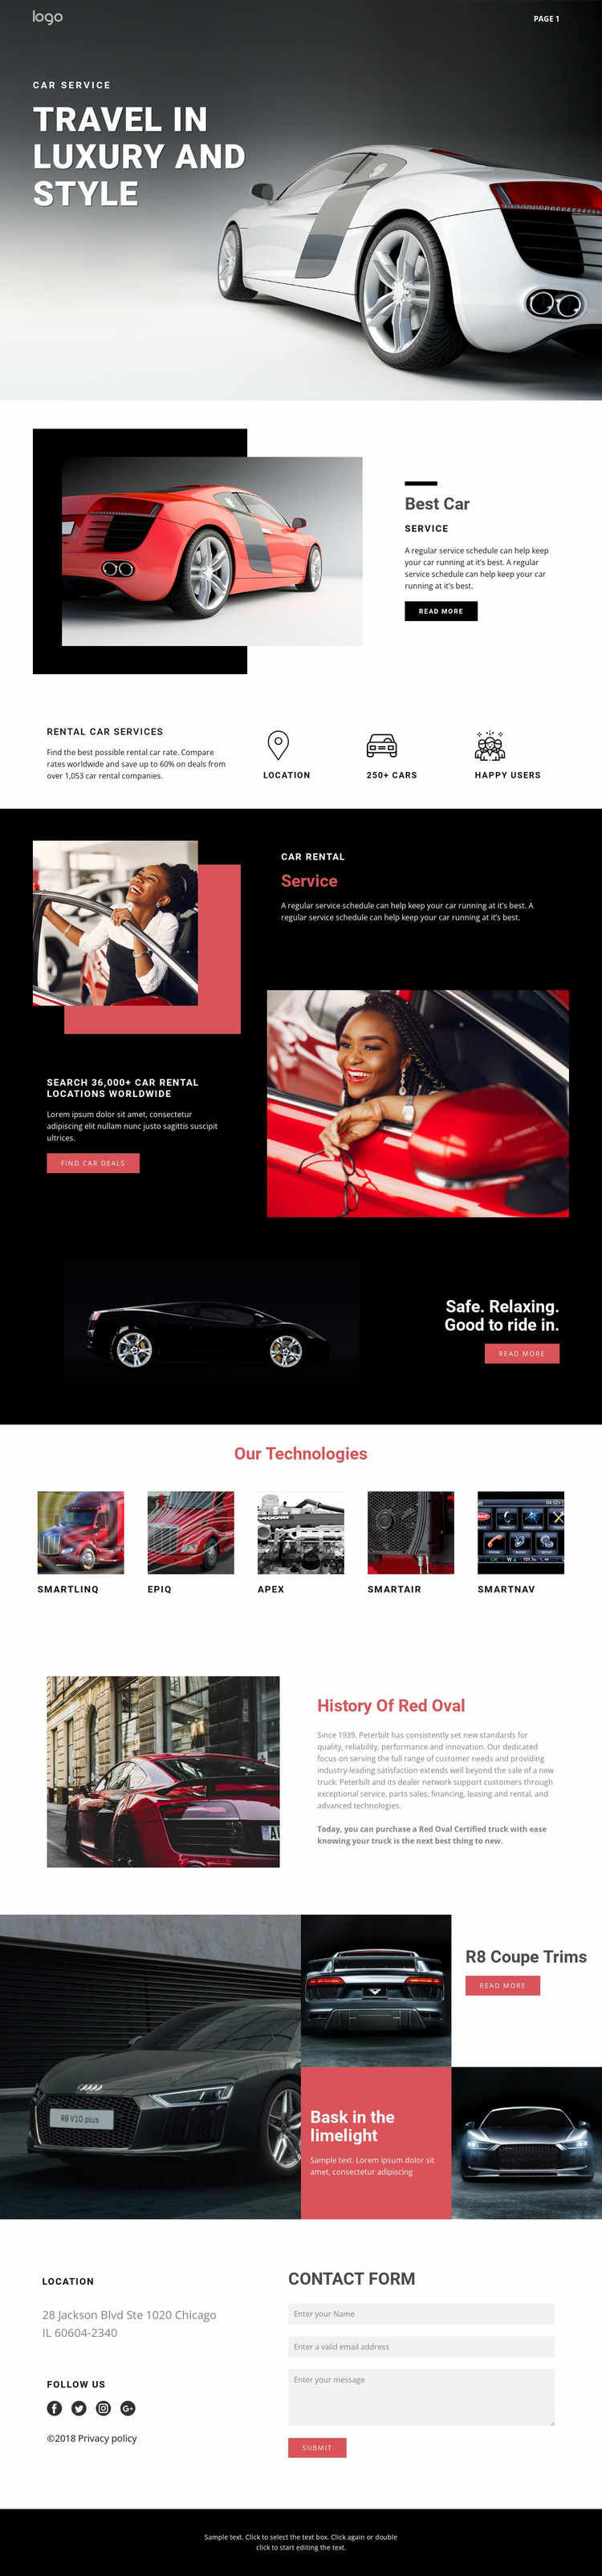 Traveling in luxury cars Website Builder Templates